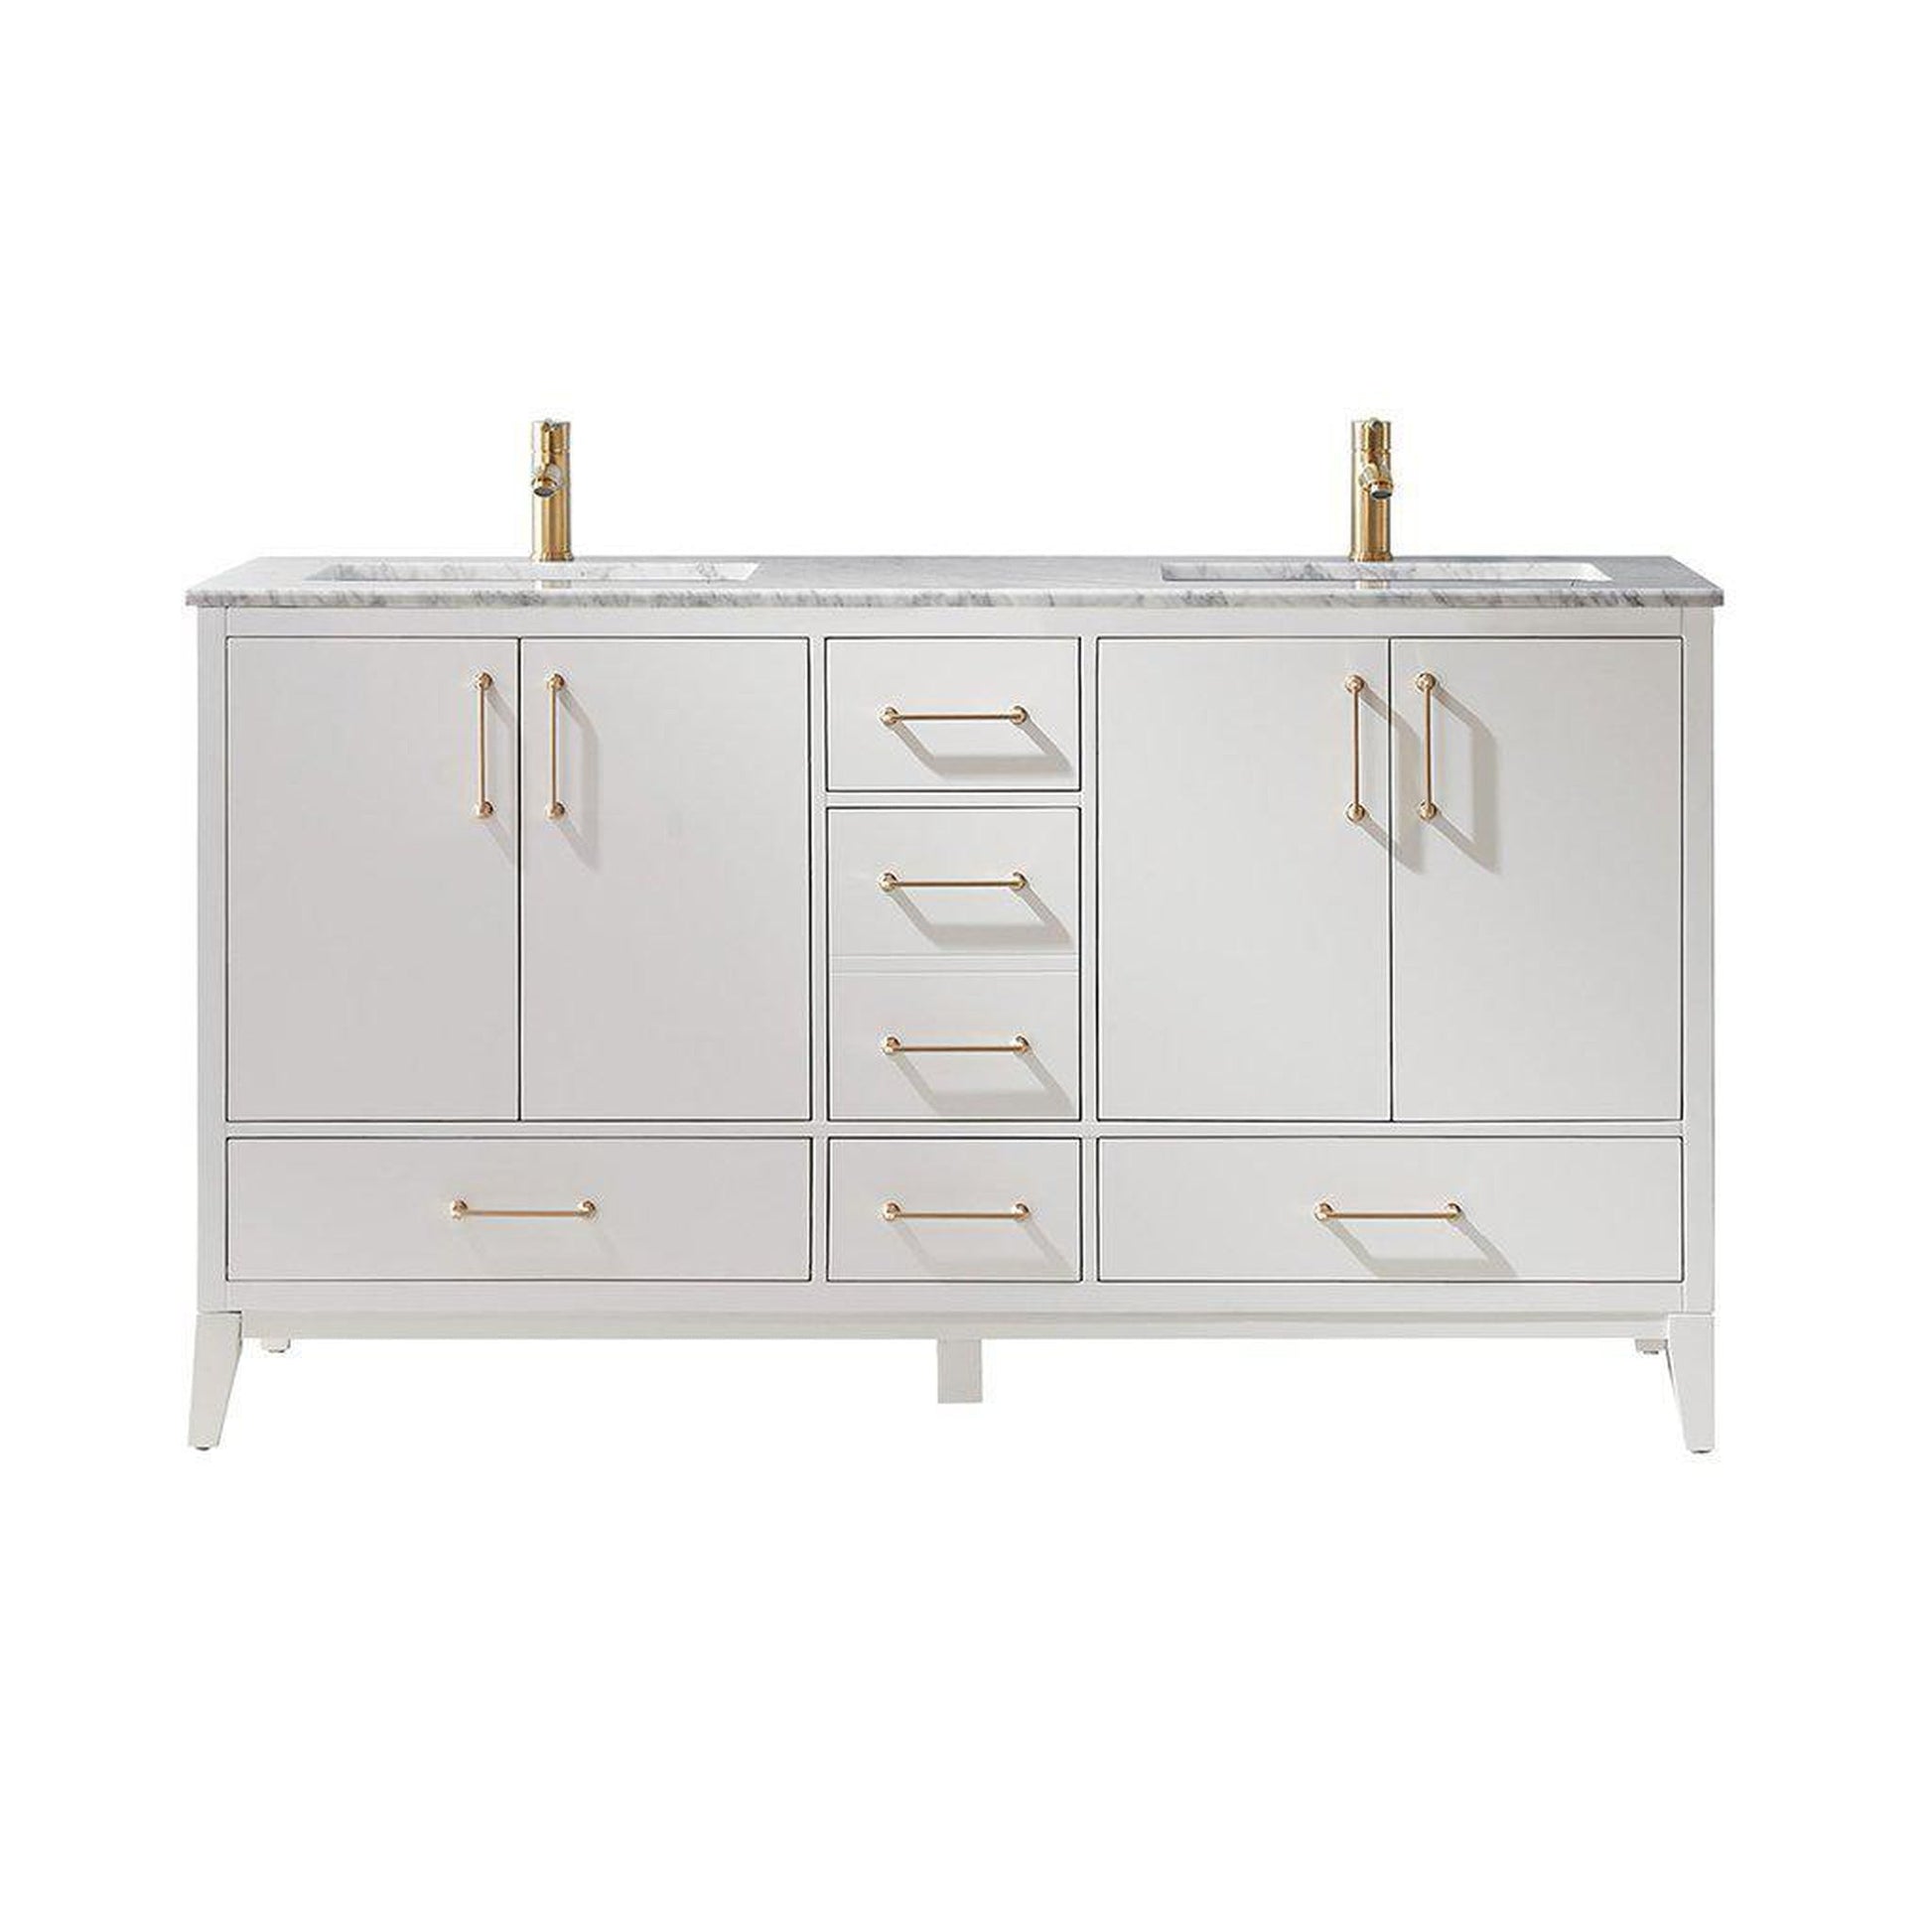 Altair Sutton 60" Double White Freestanding Bathroom Vanity Set With Natural Carrara White Marble Two Rectangular Undermount Ceramic Sinks, and Overflow